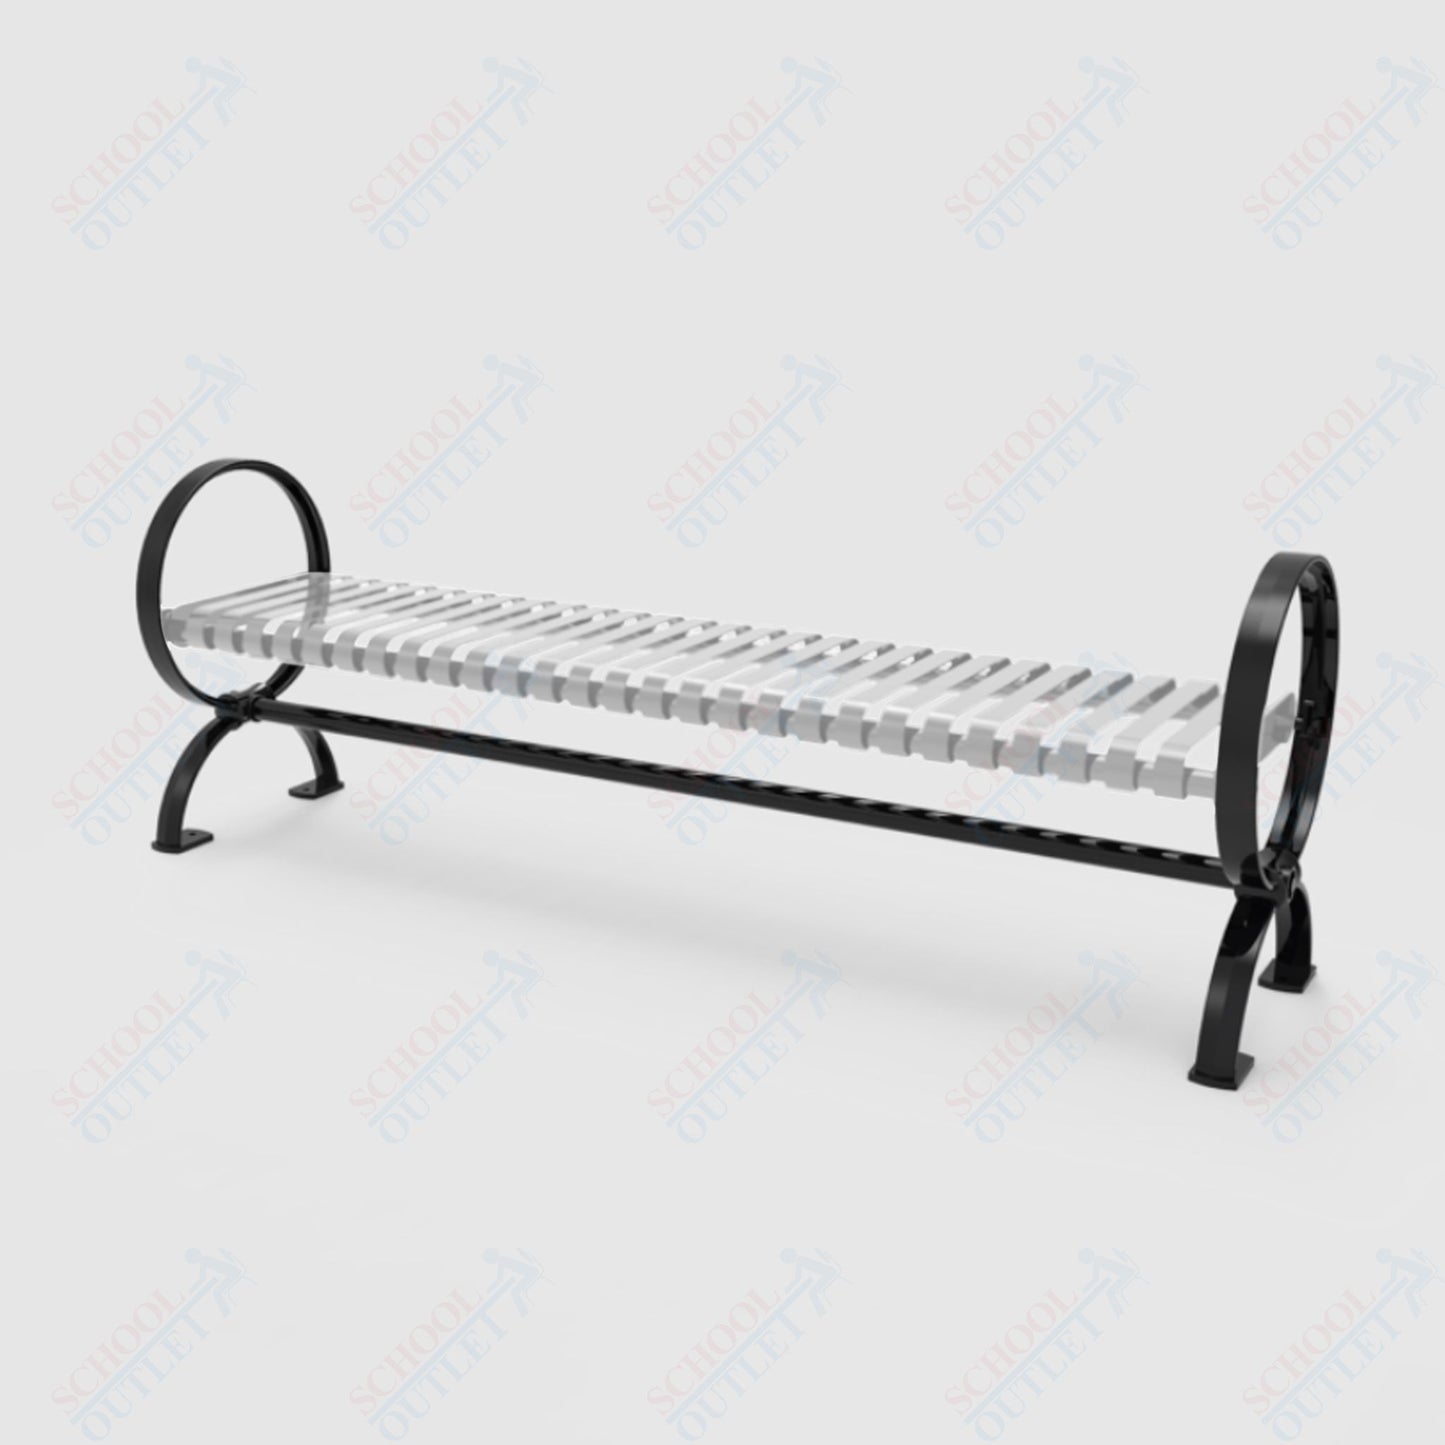 MyTcoat - Skyline Outdoor Bench with Arched Back - Portable or Surface Mount 4' L (MYT-BSL04-O-57)